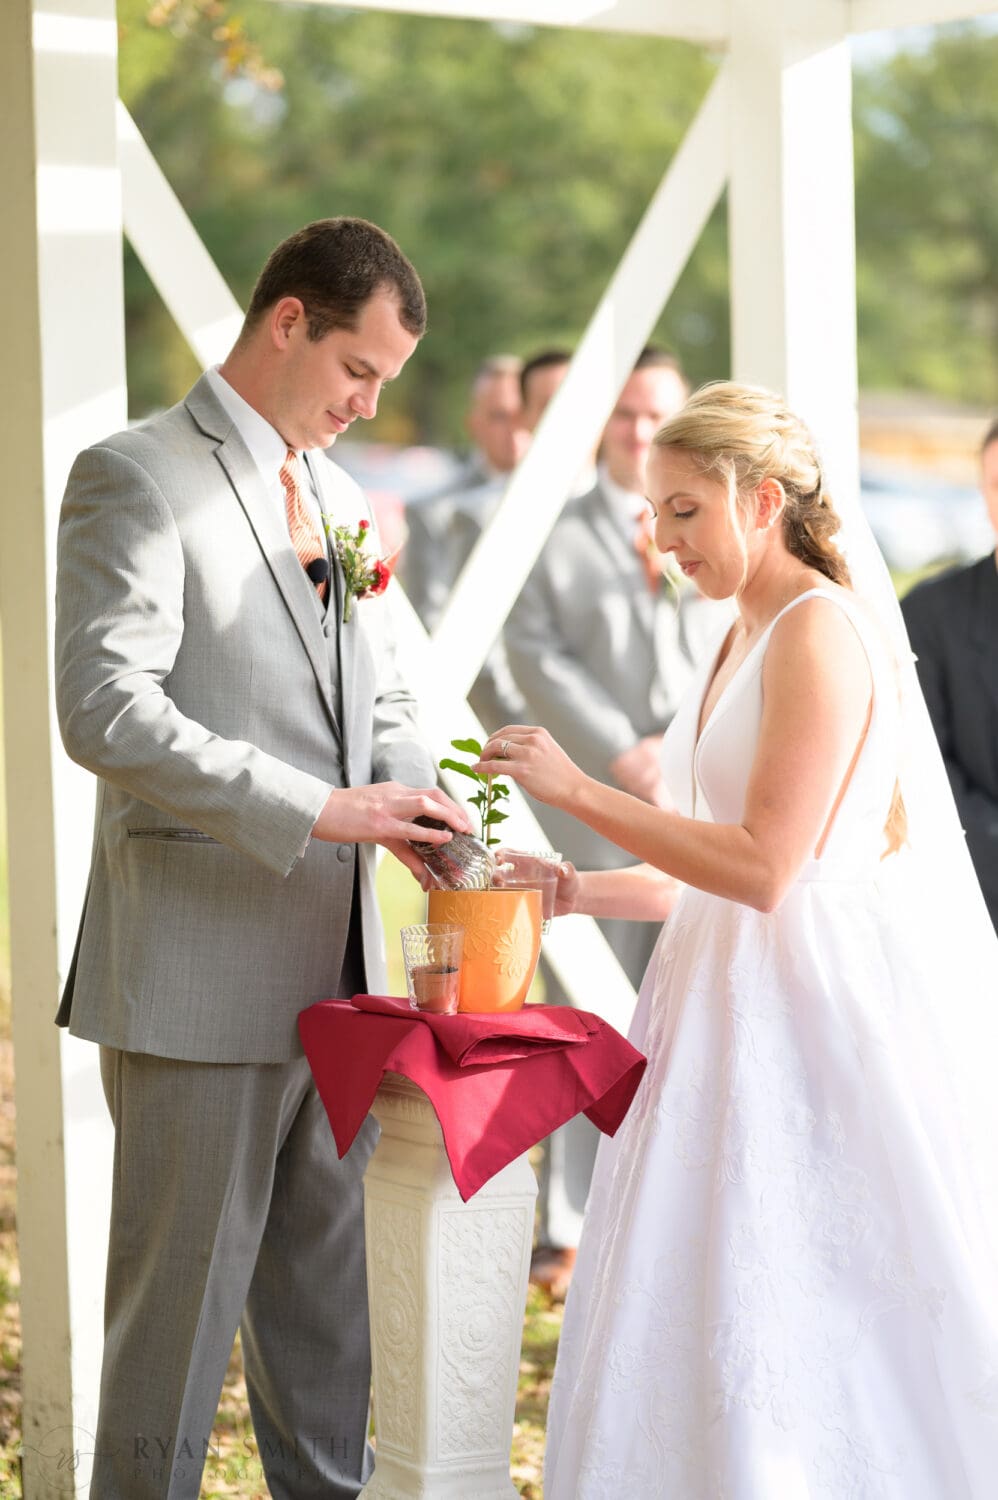 Bride and groom planting a tree together during the ceremony - The Blessed Barn